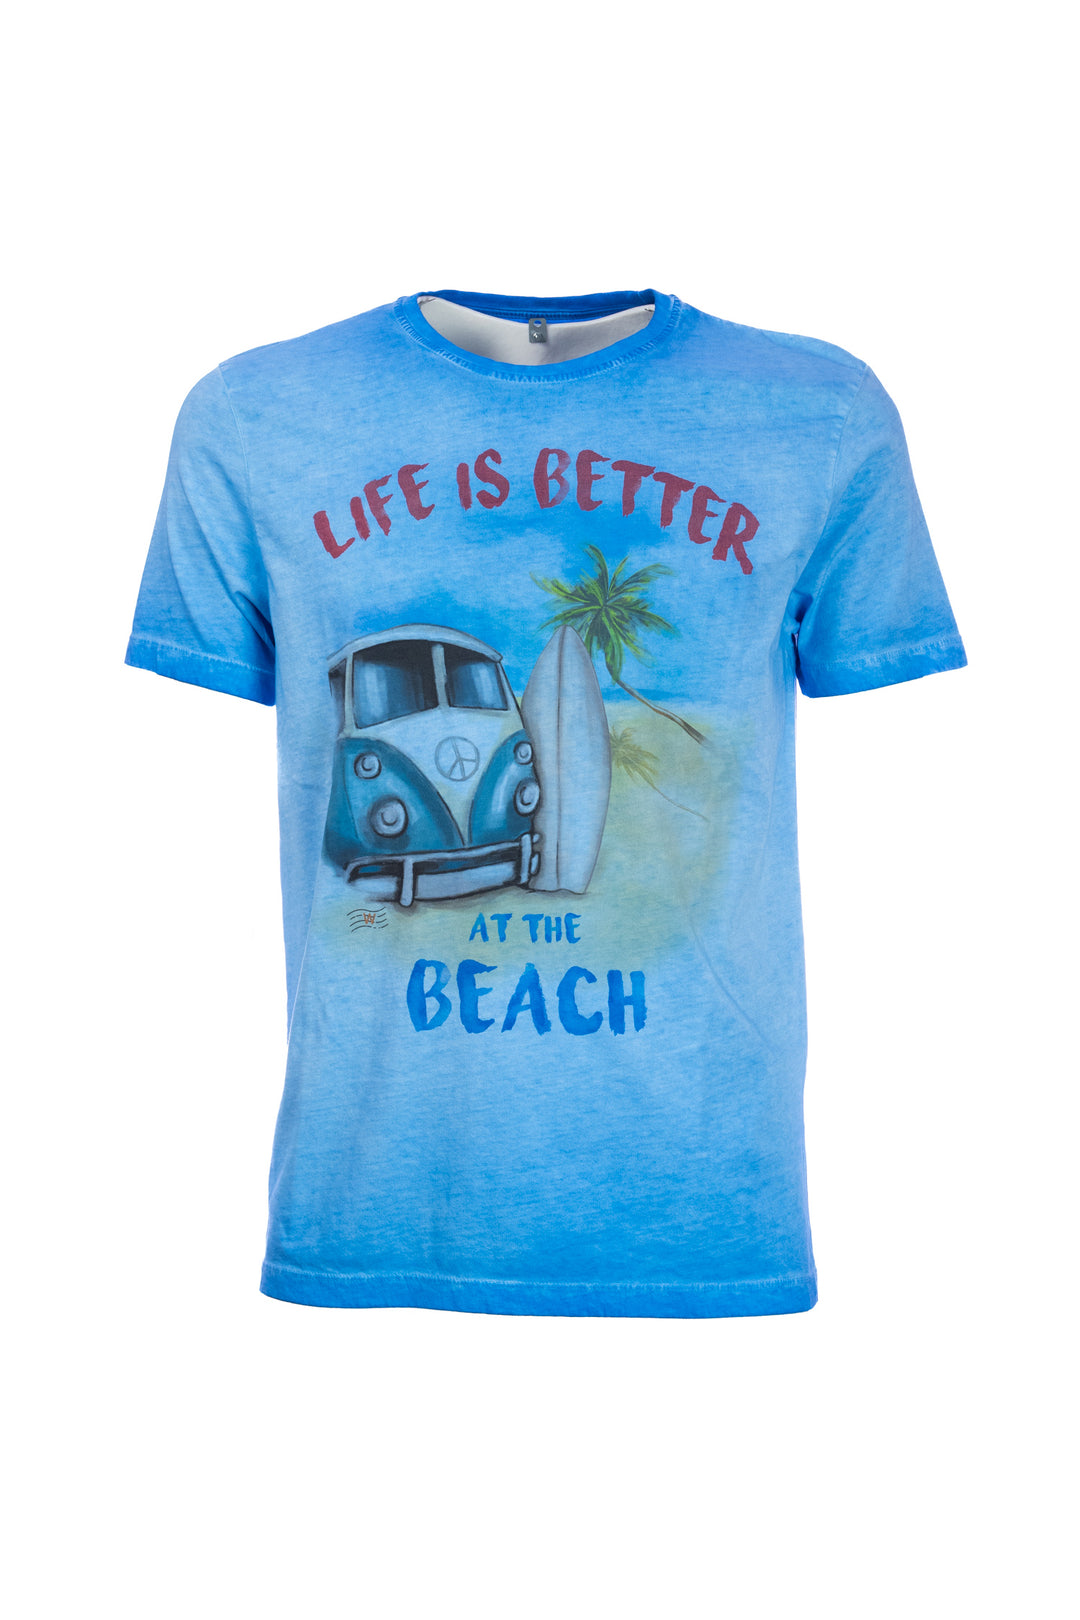 W-POSTAGE T-shirt azzurra in cotone con stampa “life is better at the beach” - Mancinelli 1954